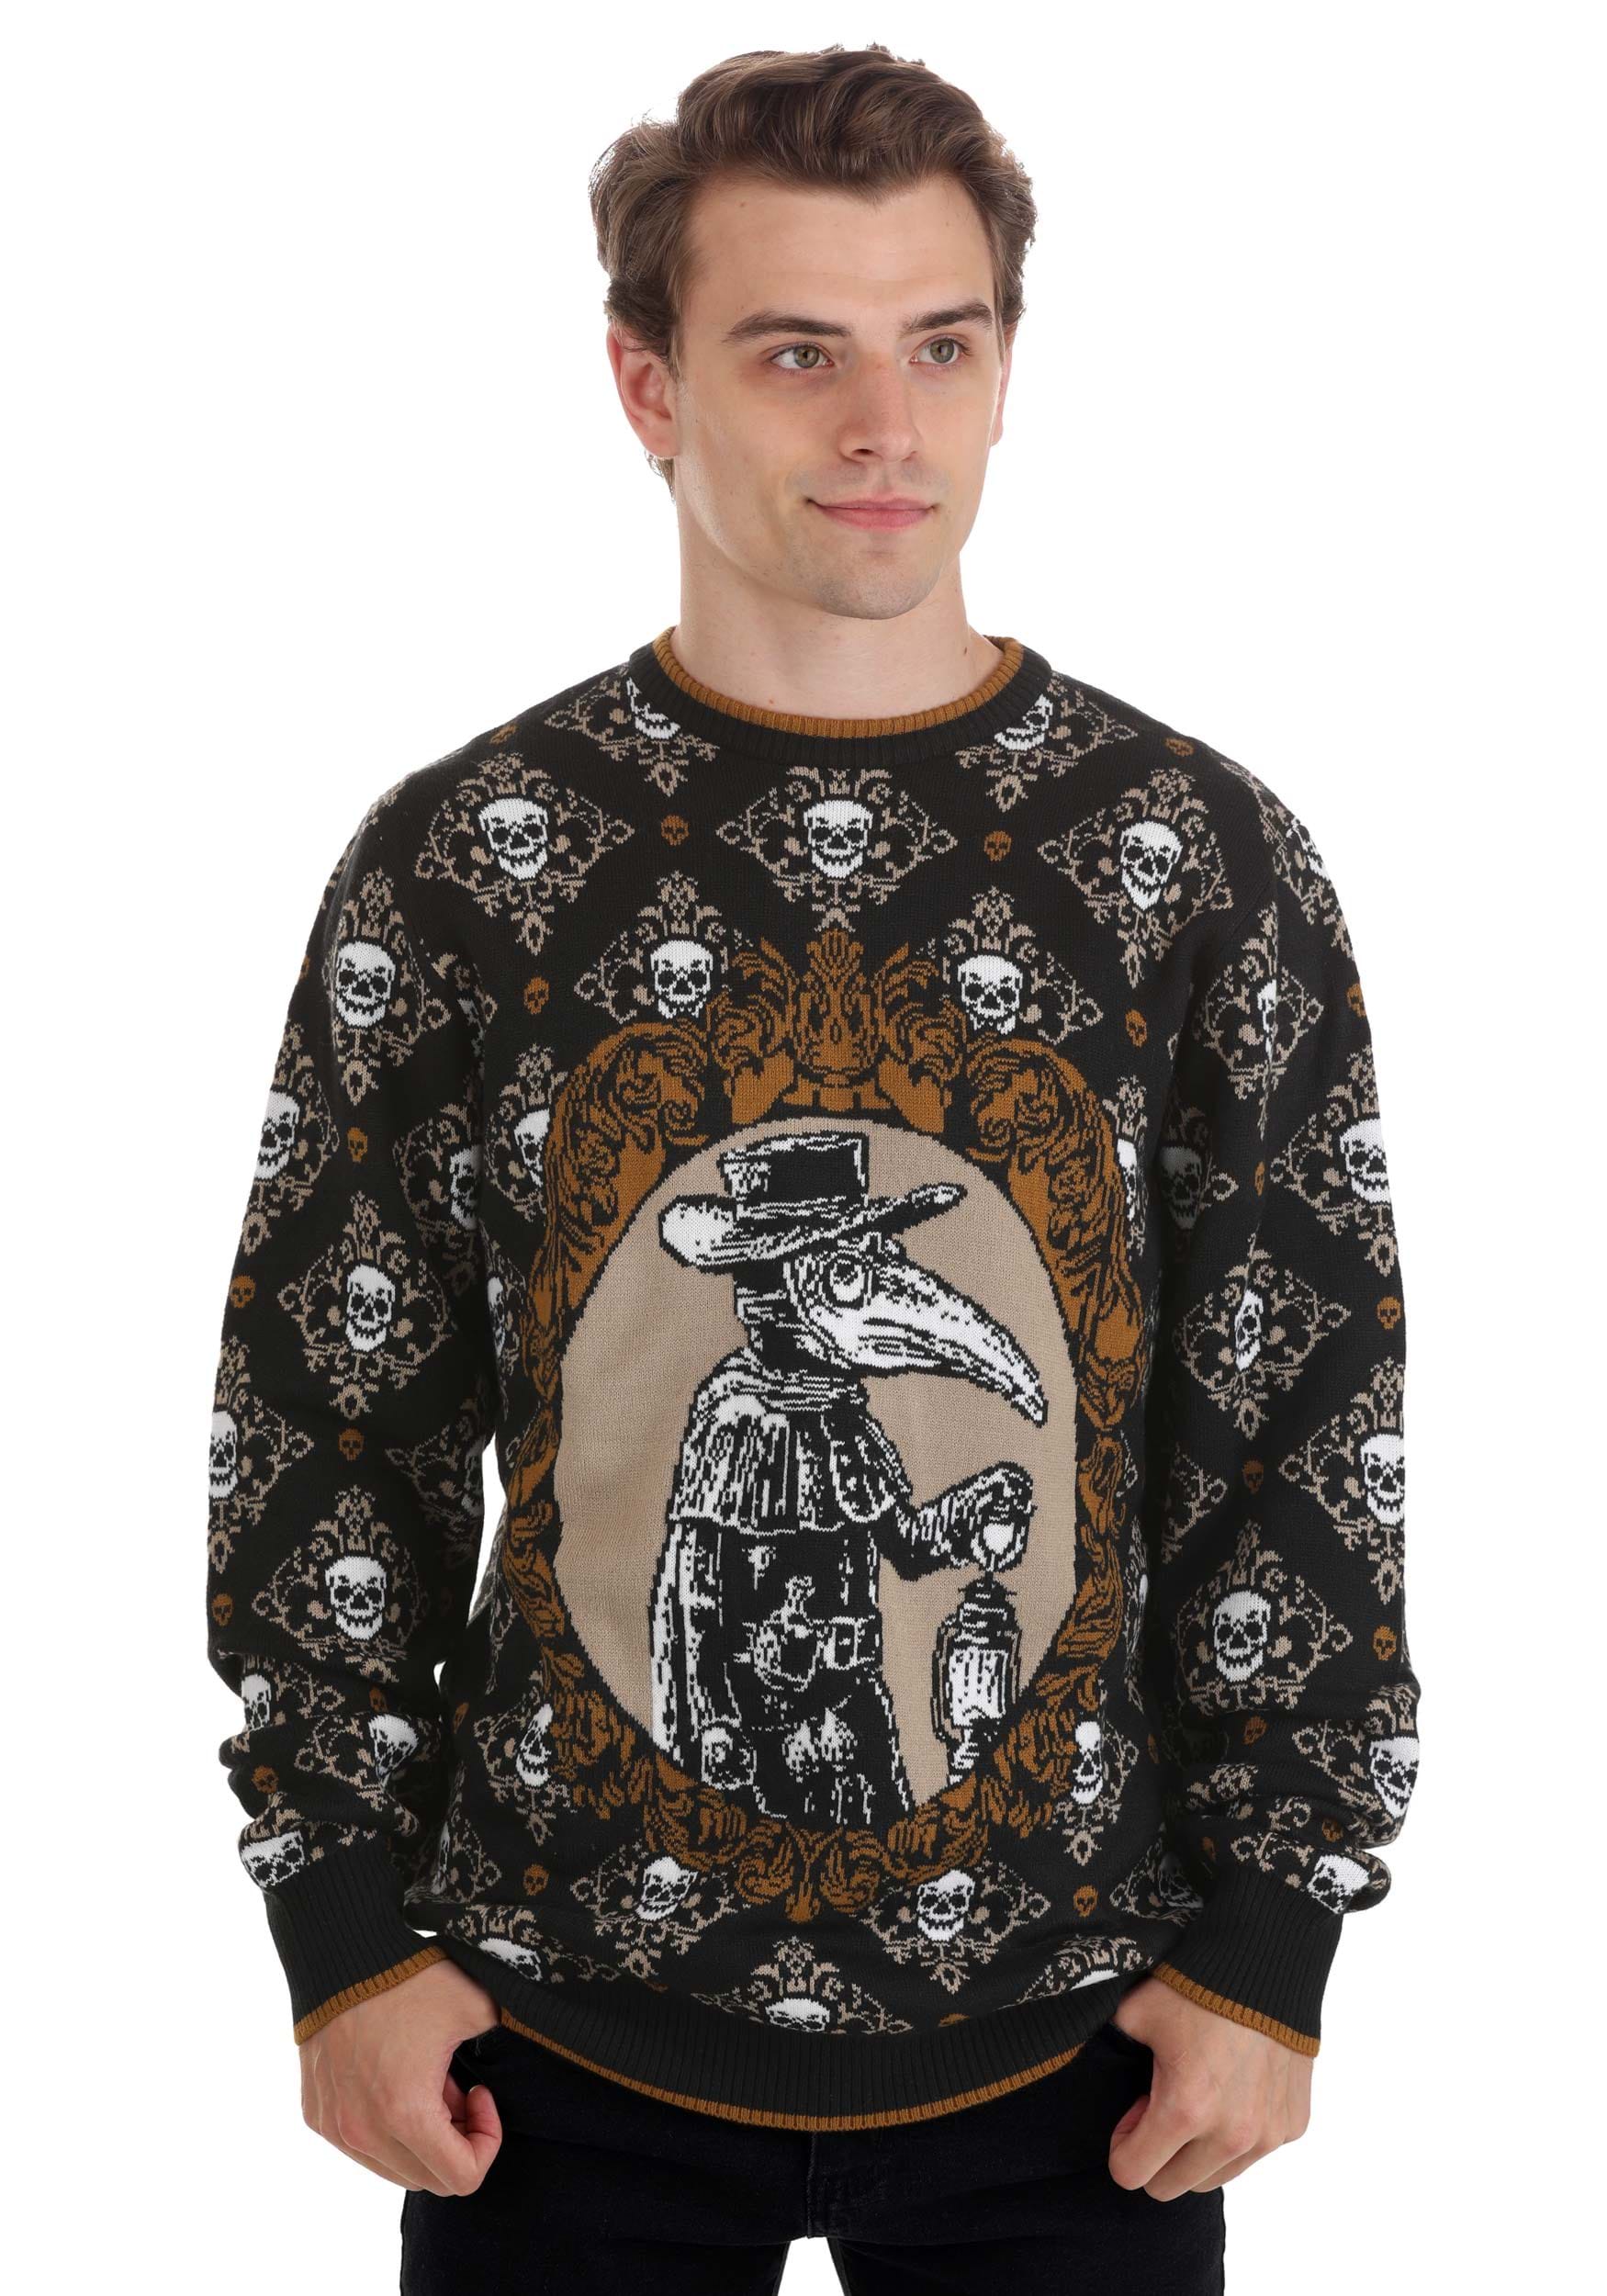 Photos - Fancy Dress FUN Wear Adult Plague Doctor Ugly Sweater | Exclusive Sweaters Black/B